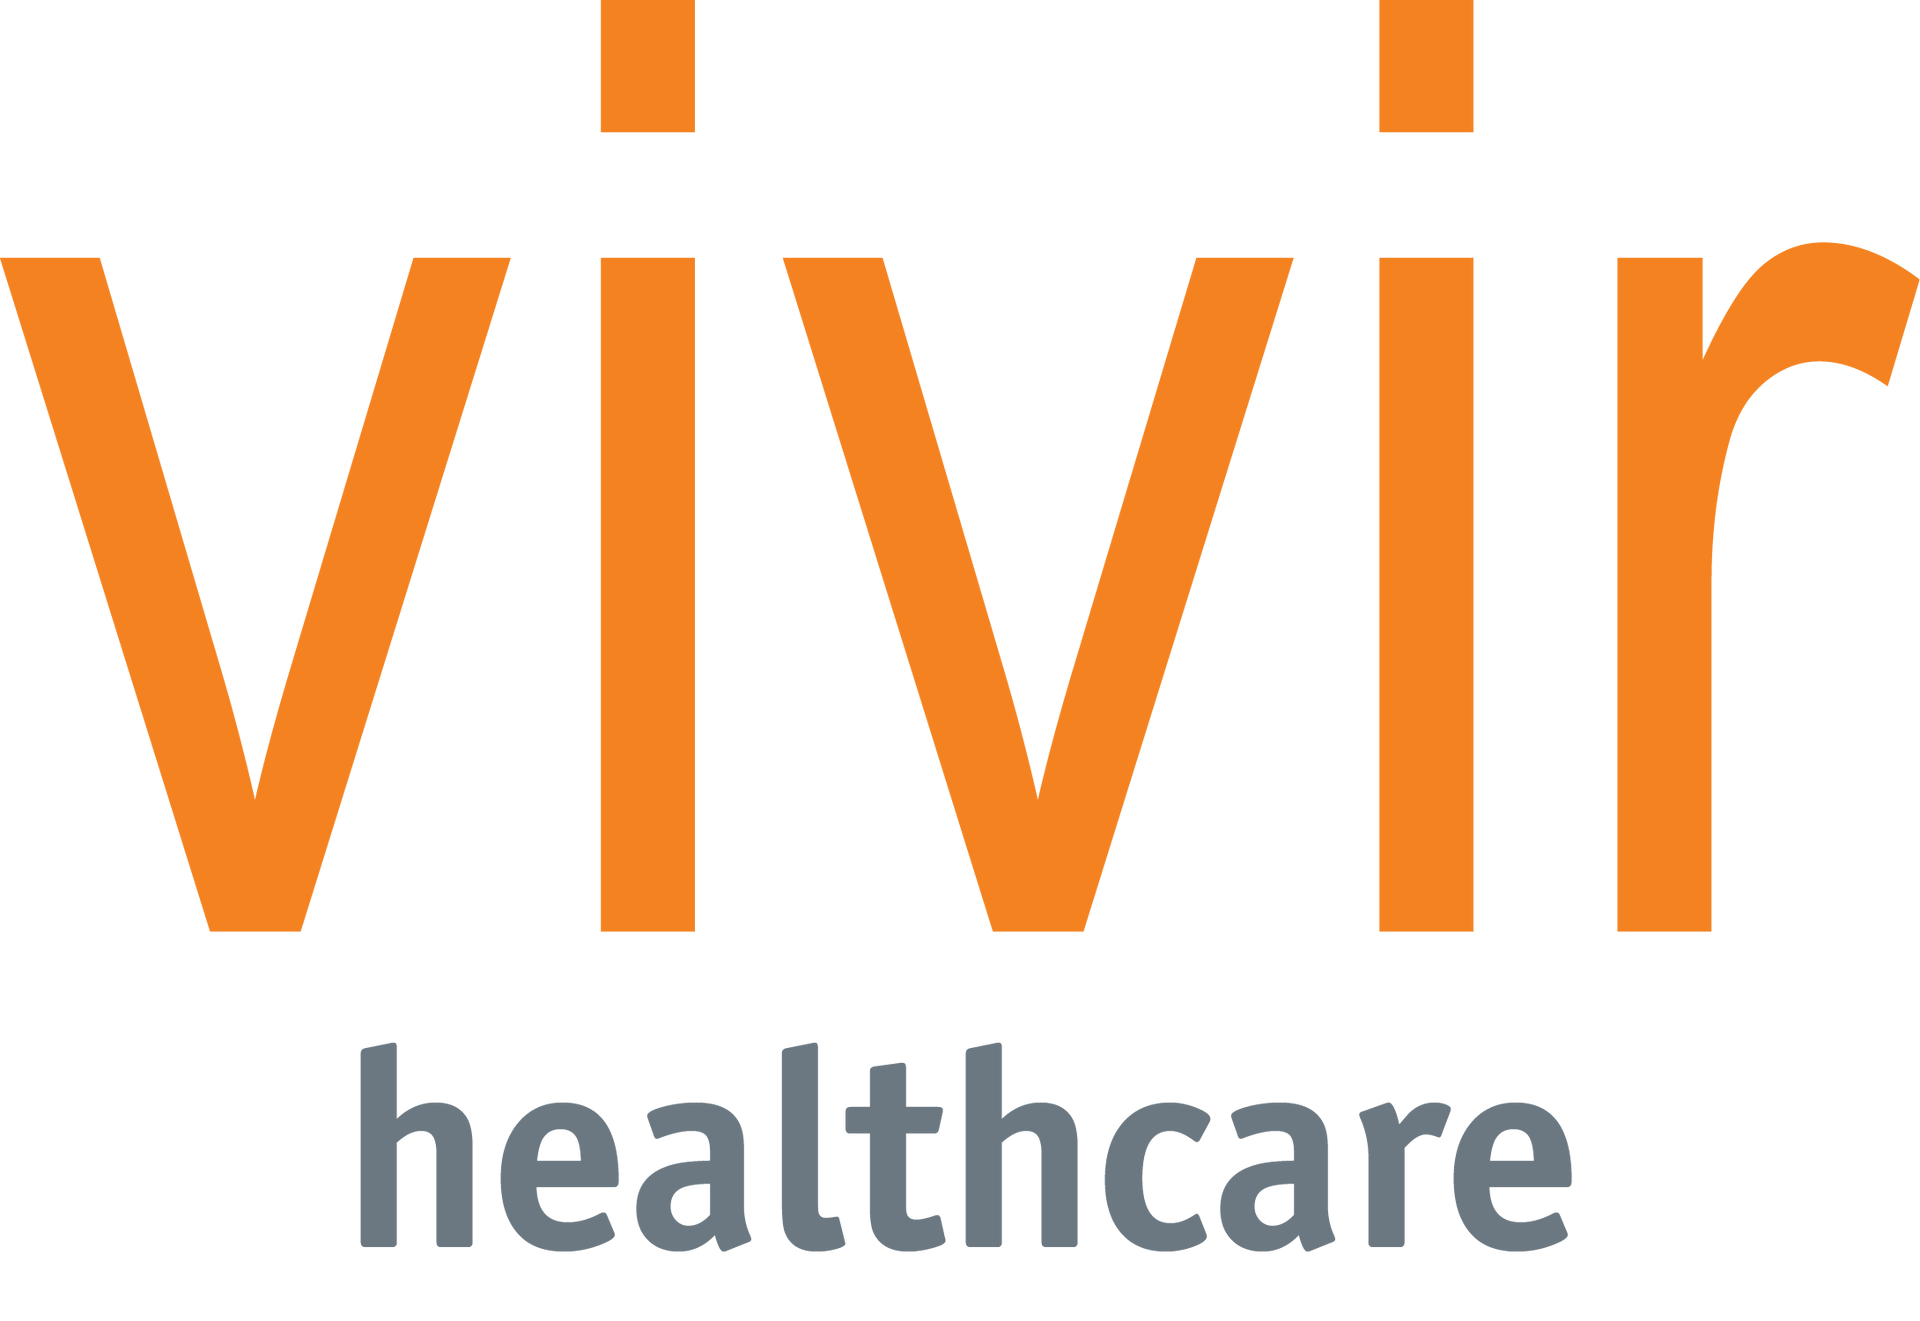 The logo for vivir healthcare is orange and gray.